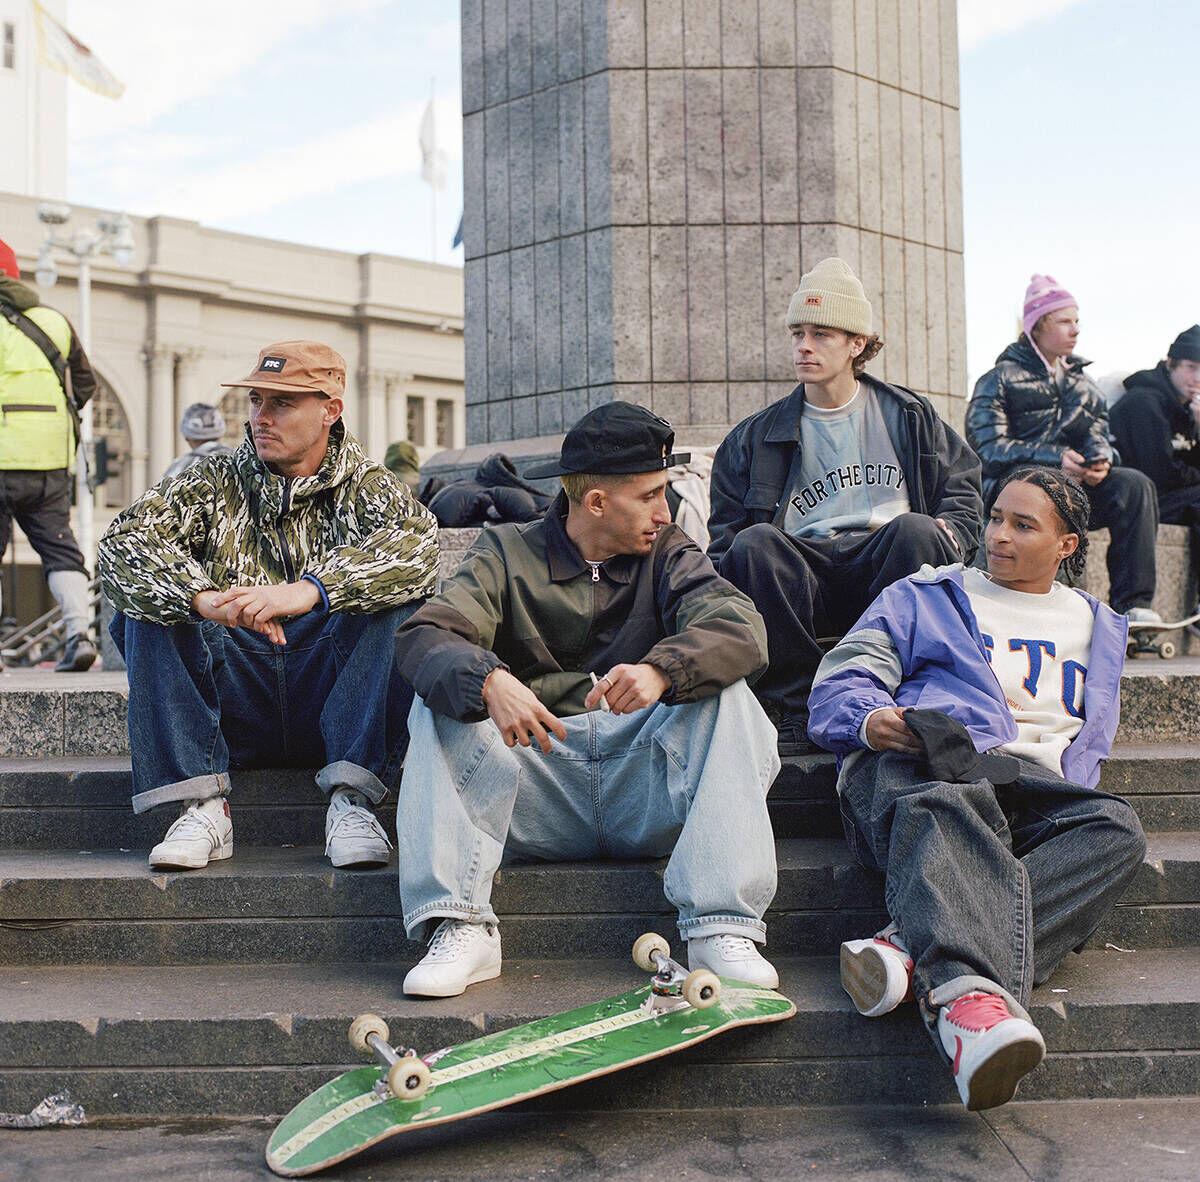 90's Skateboard Styles That Are Still Relevant Today